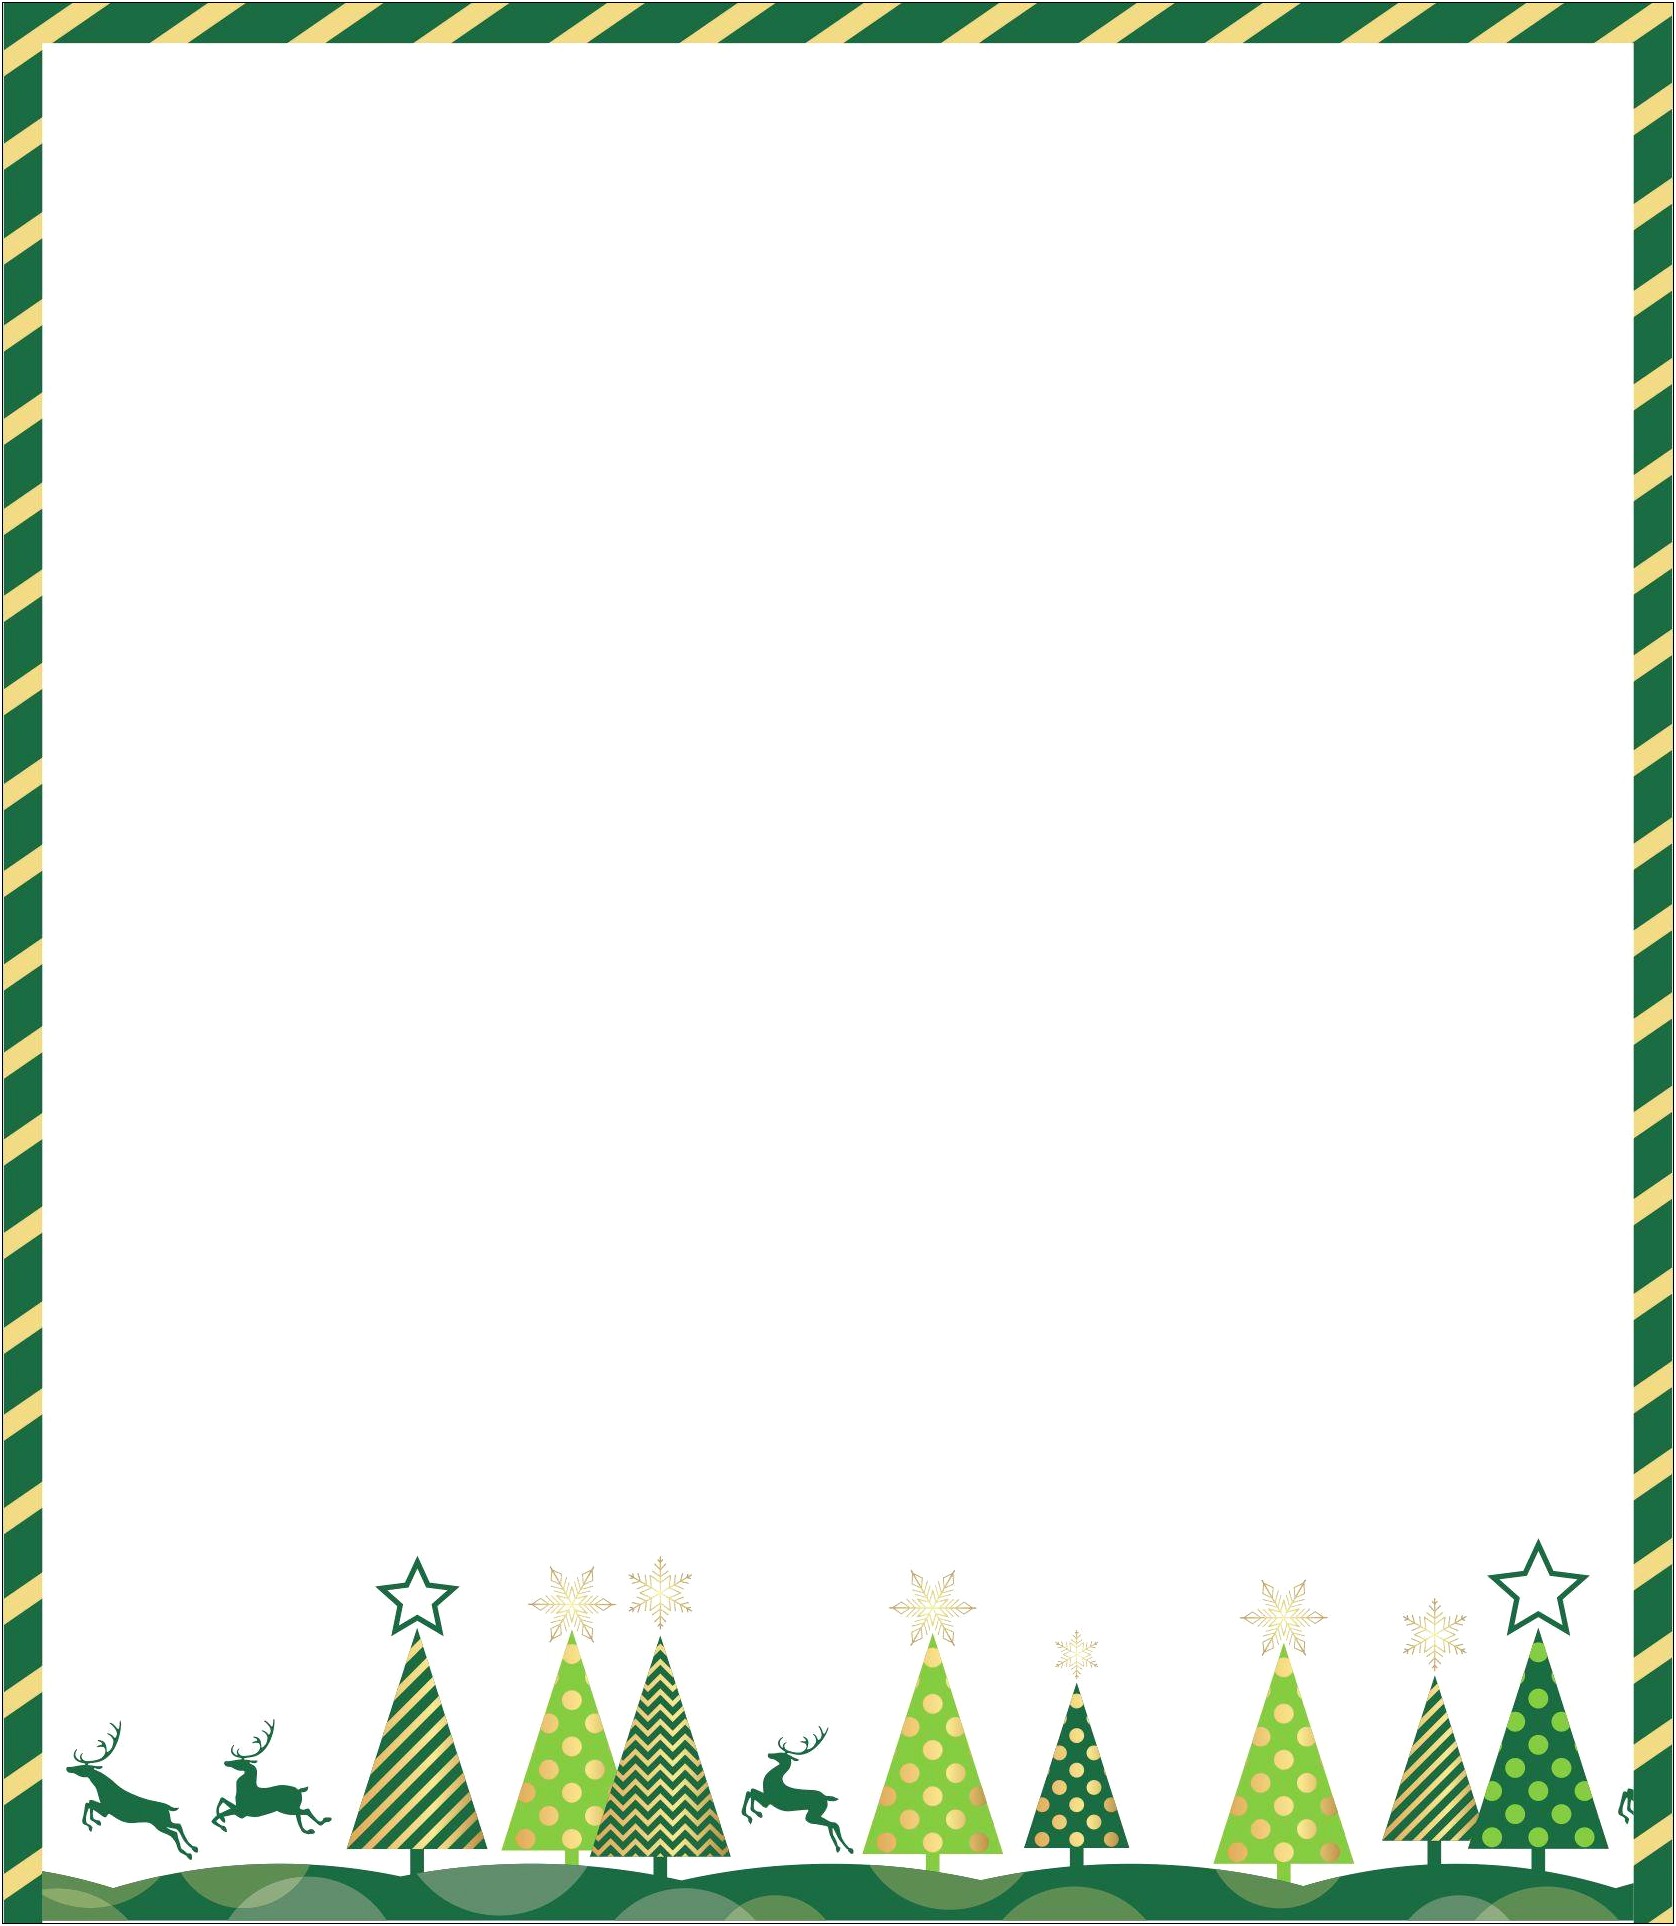 Free Christmas Border Templates For Publisher Templates : Resume